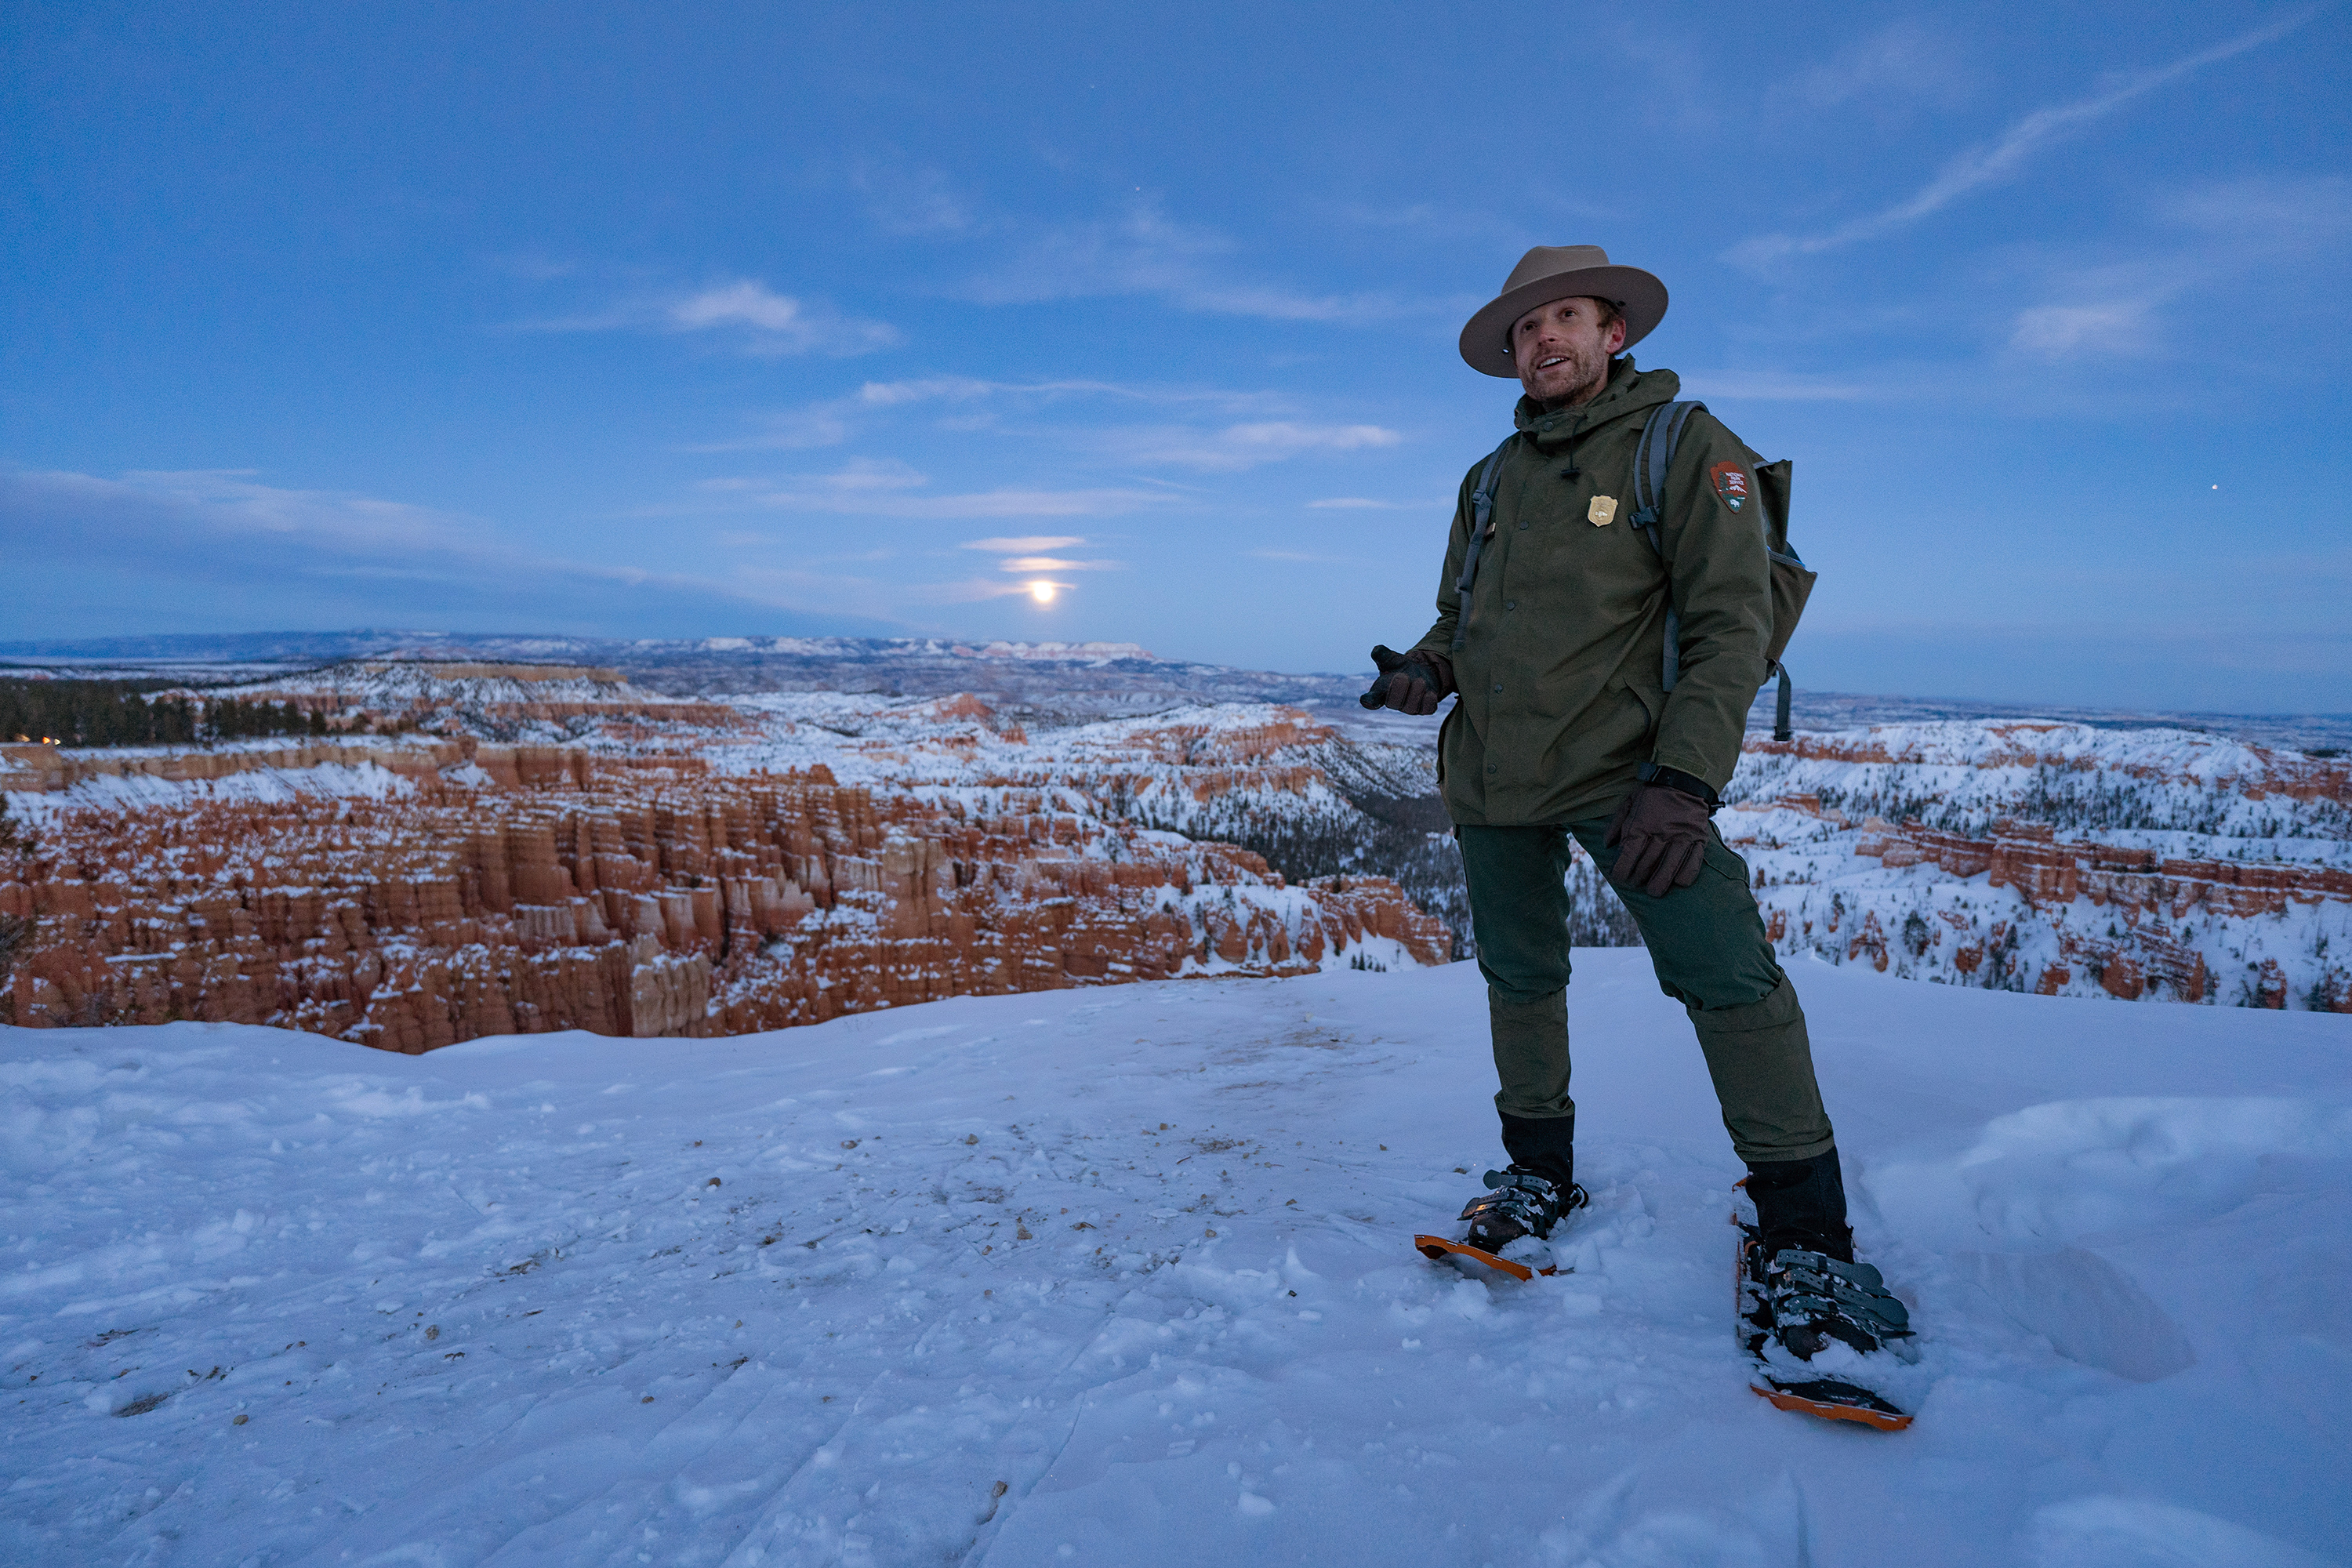 A park ranger stands on a snowy vista pointing to a full moon in the background.